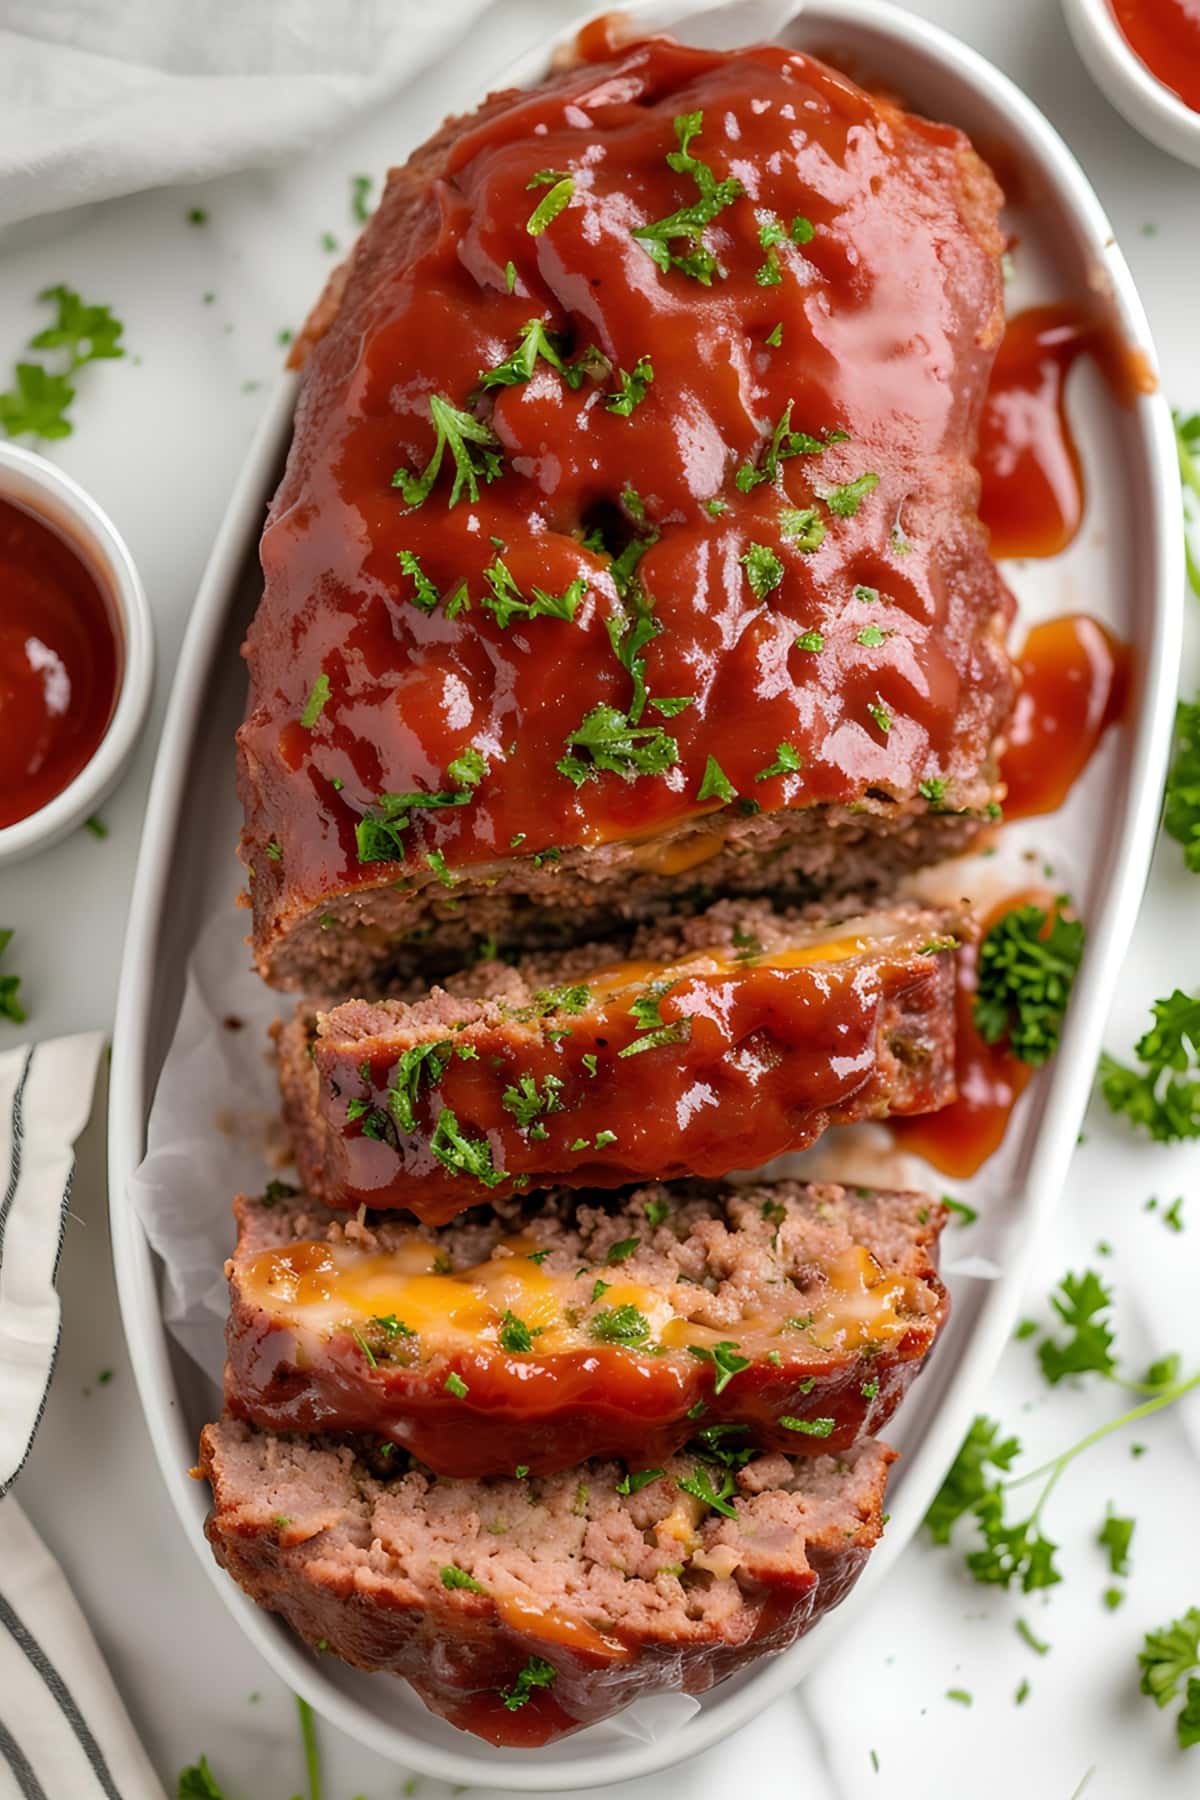 Cheeseburger Meatloaf with Cheese Filling Topped with Ketchup